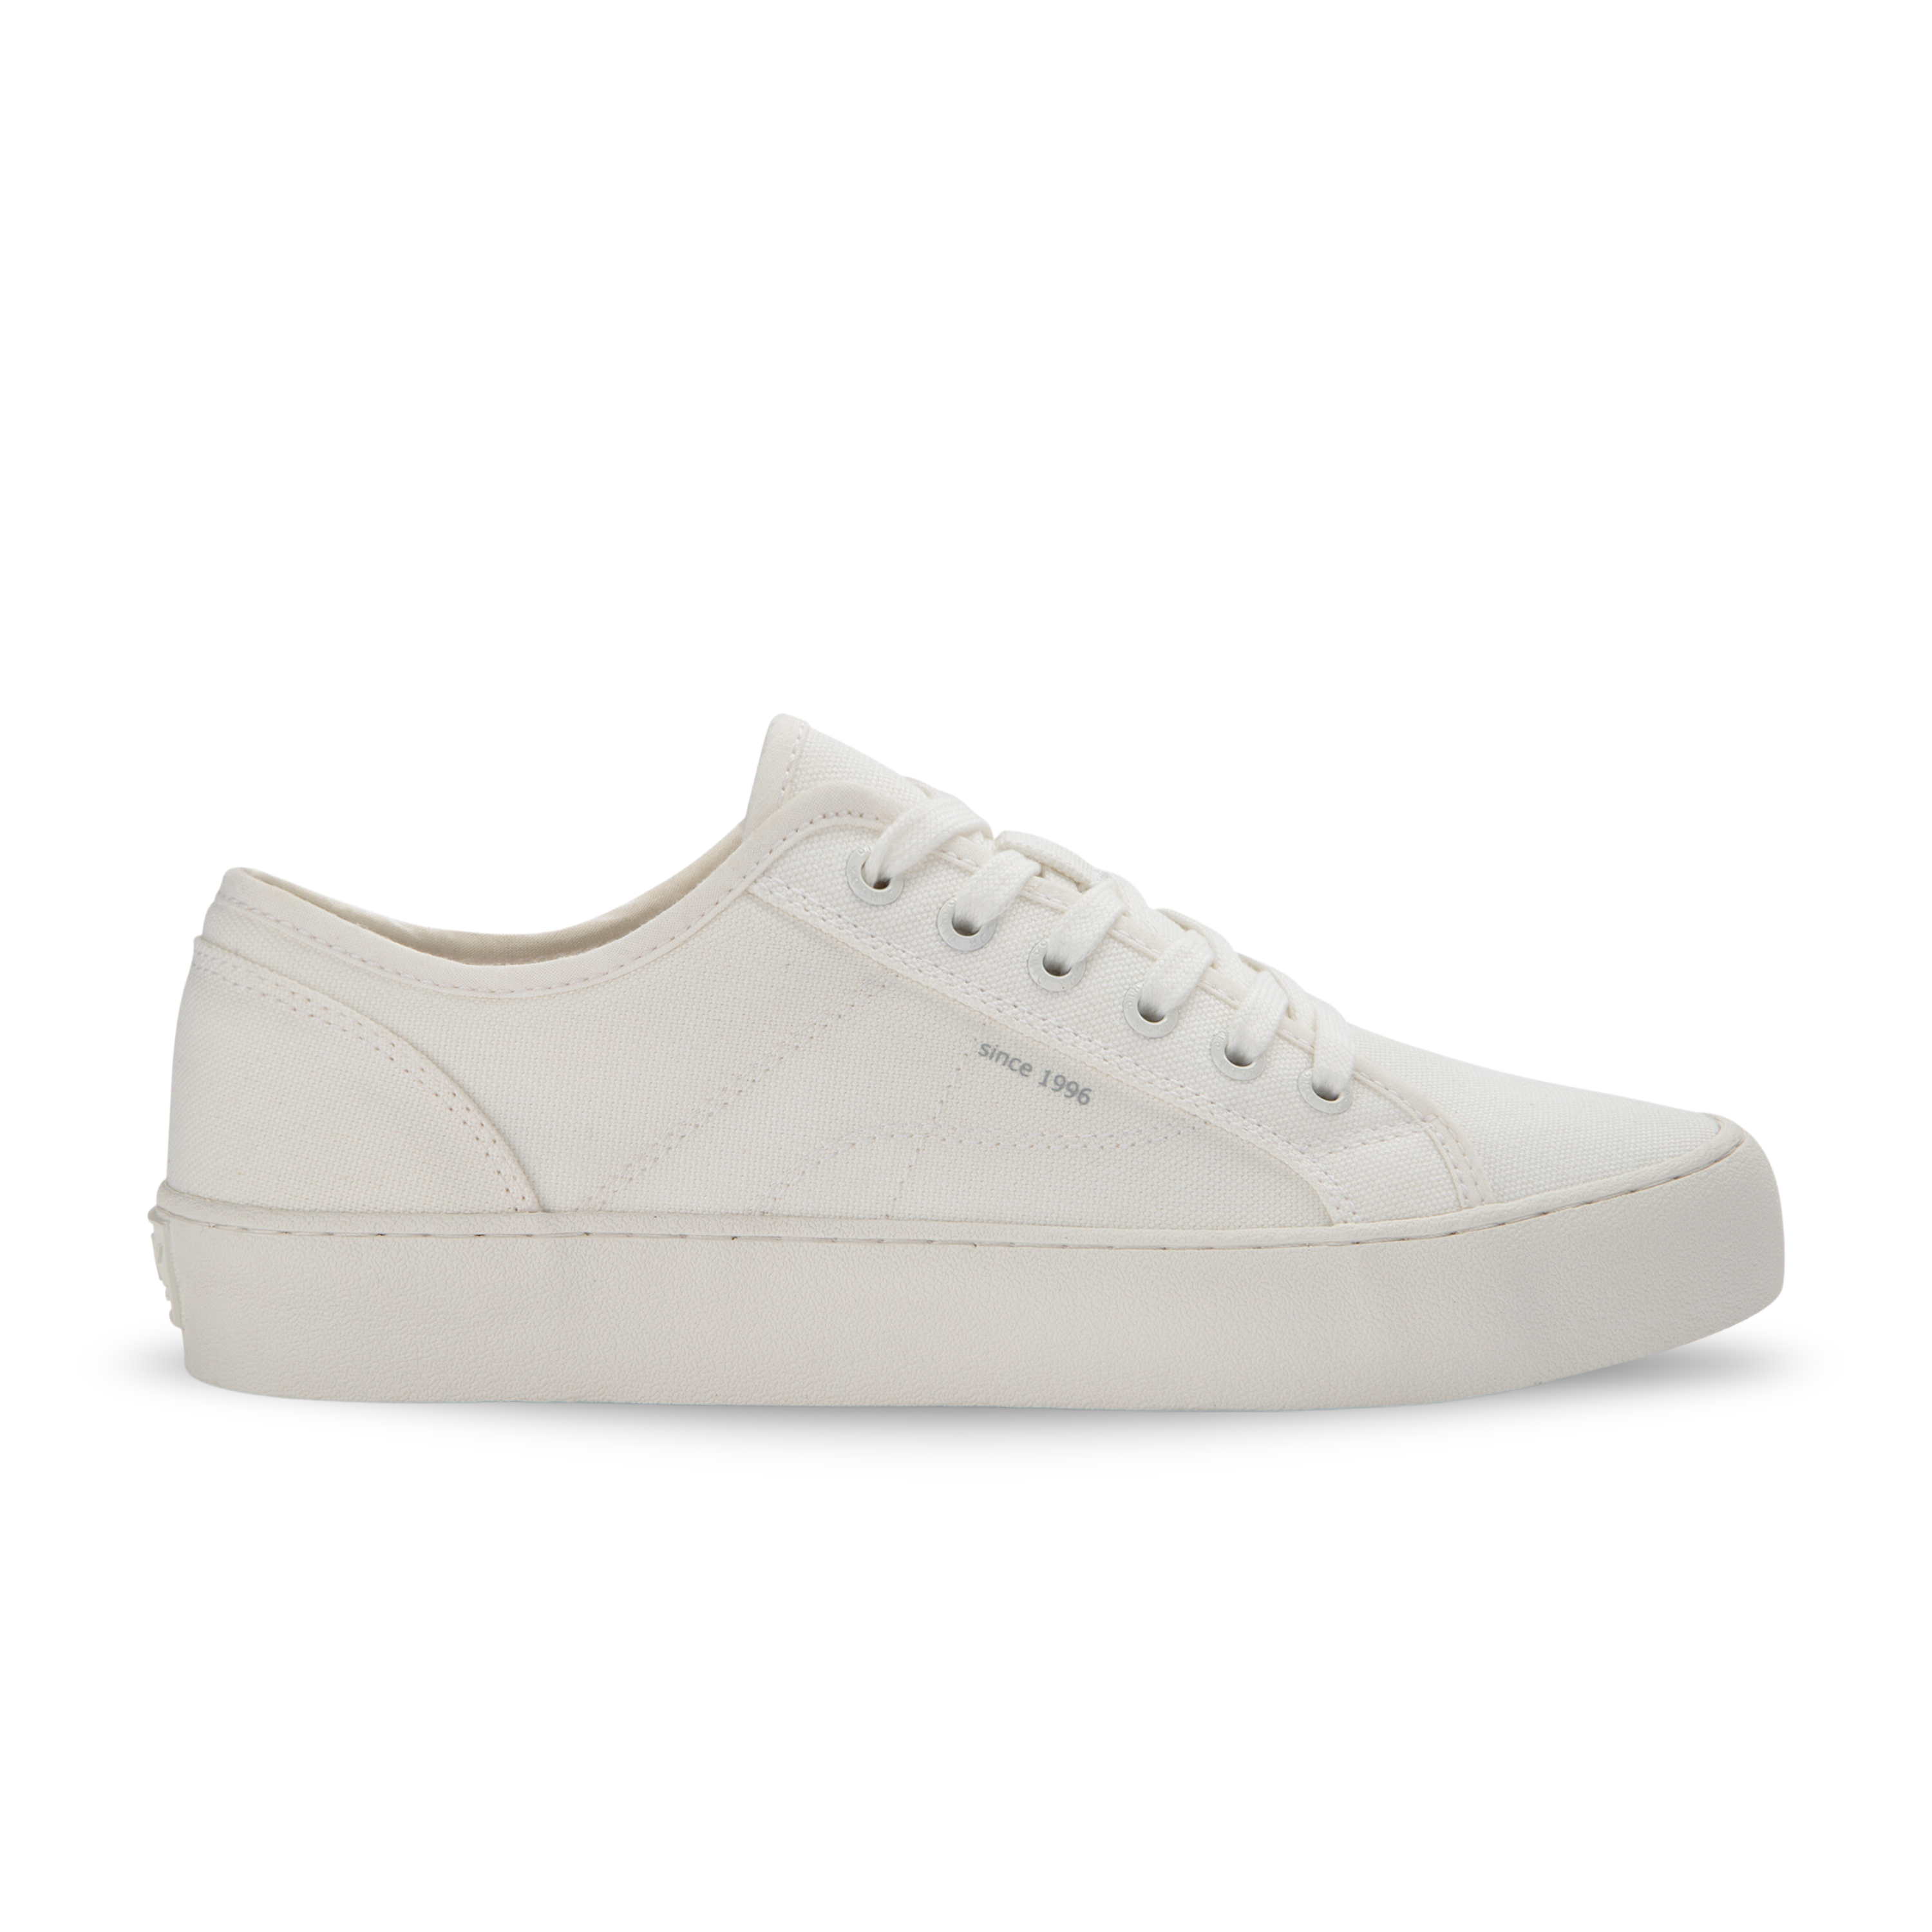 Giày snearkers nam nữ DINCOX Shoes - E18 Off White, Vải Canvas cao cấp